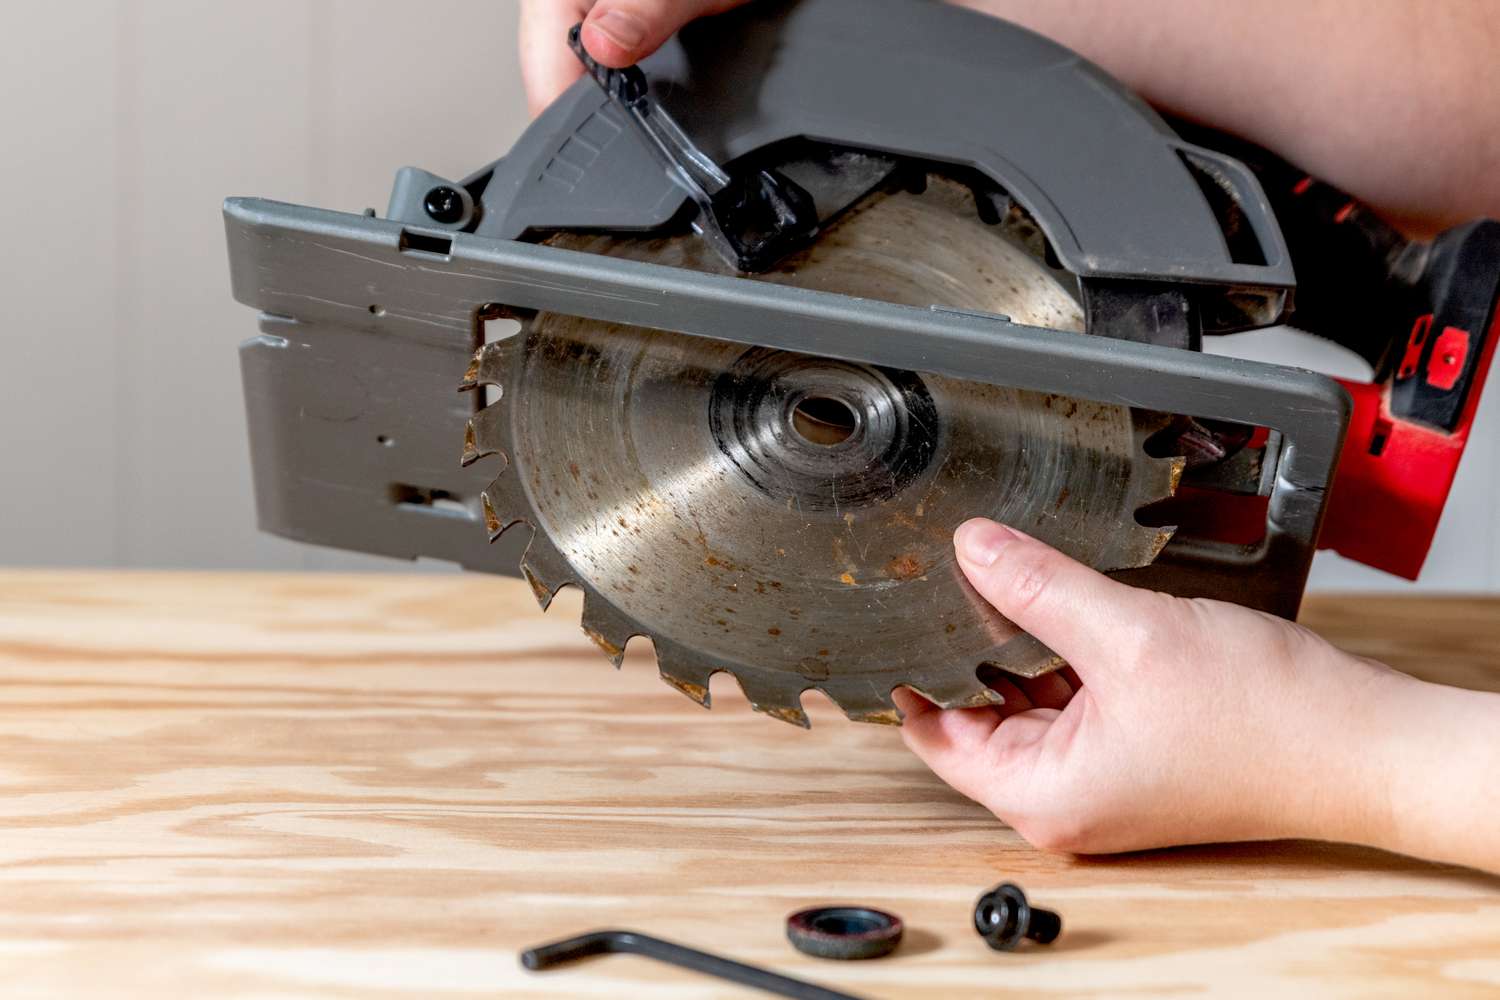 Dirty saw blade removed from unplugged saw machine